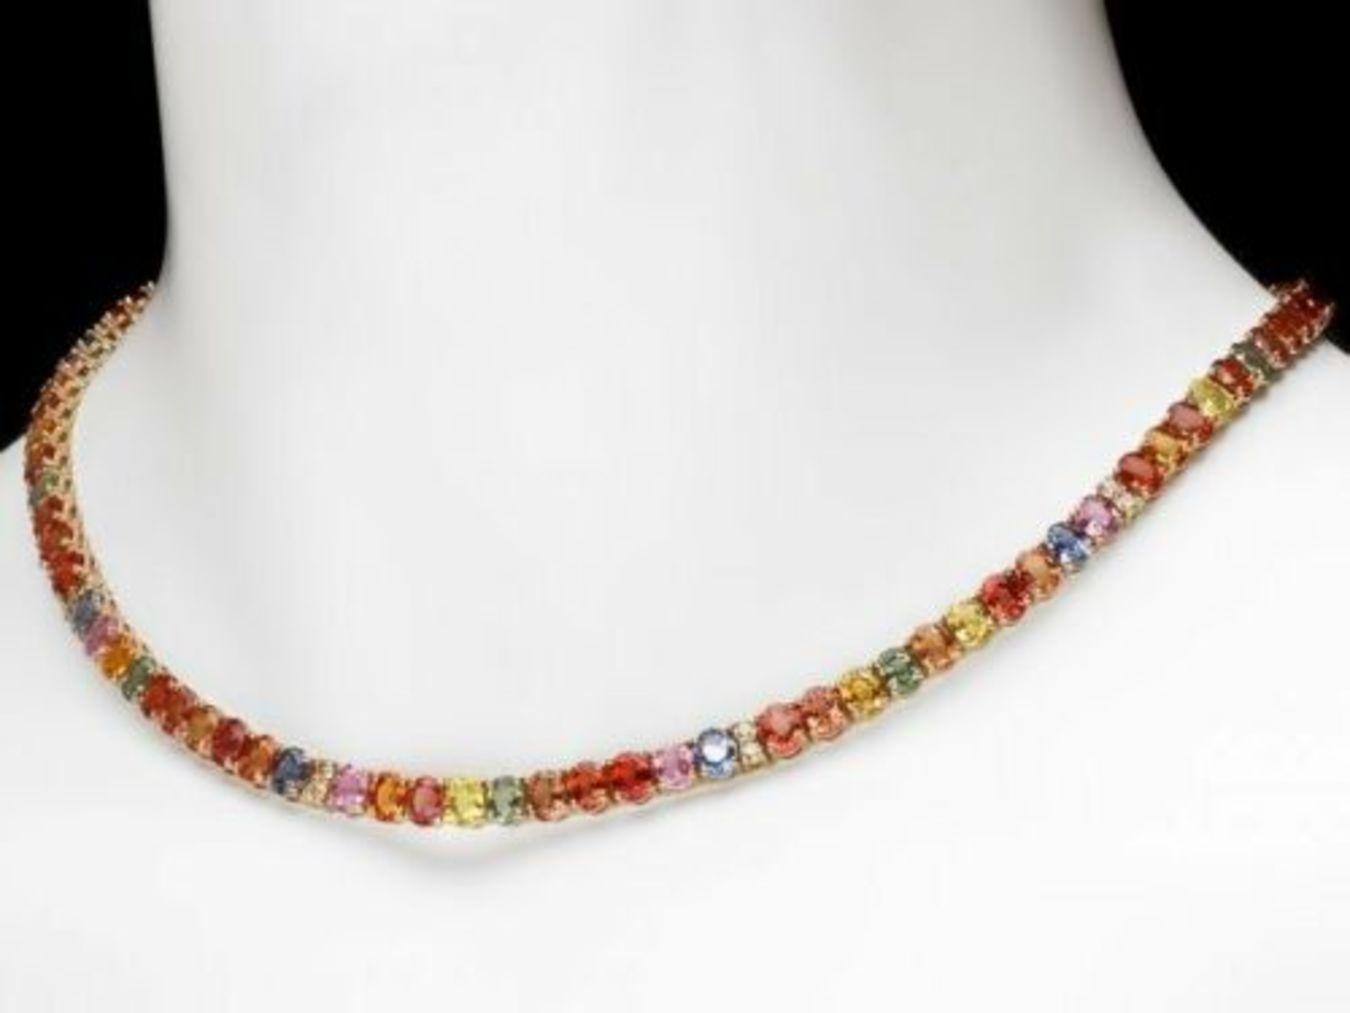 14K Yellow Gold 43.15ct Fancy Color Sapphire and 0.90ct Diamond Necklace